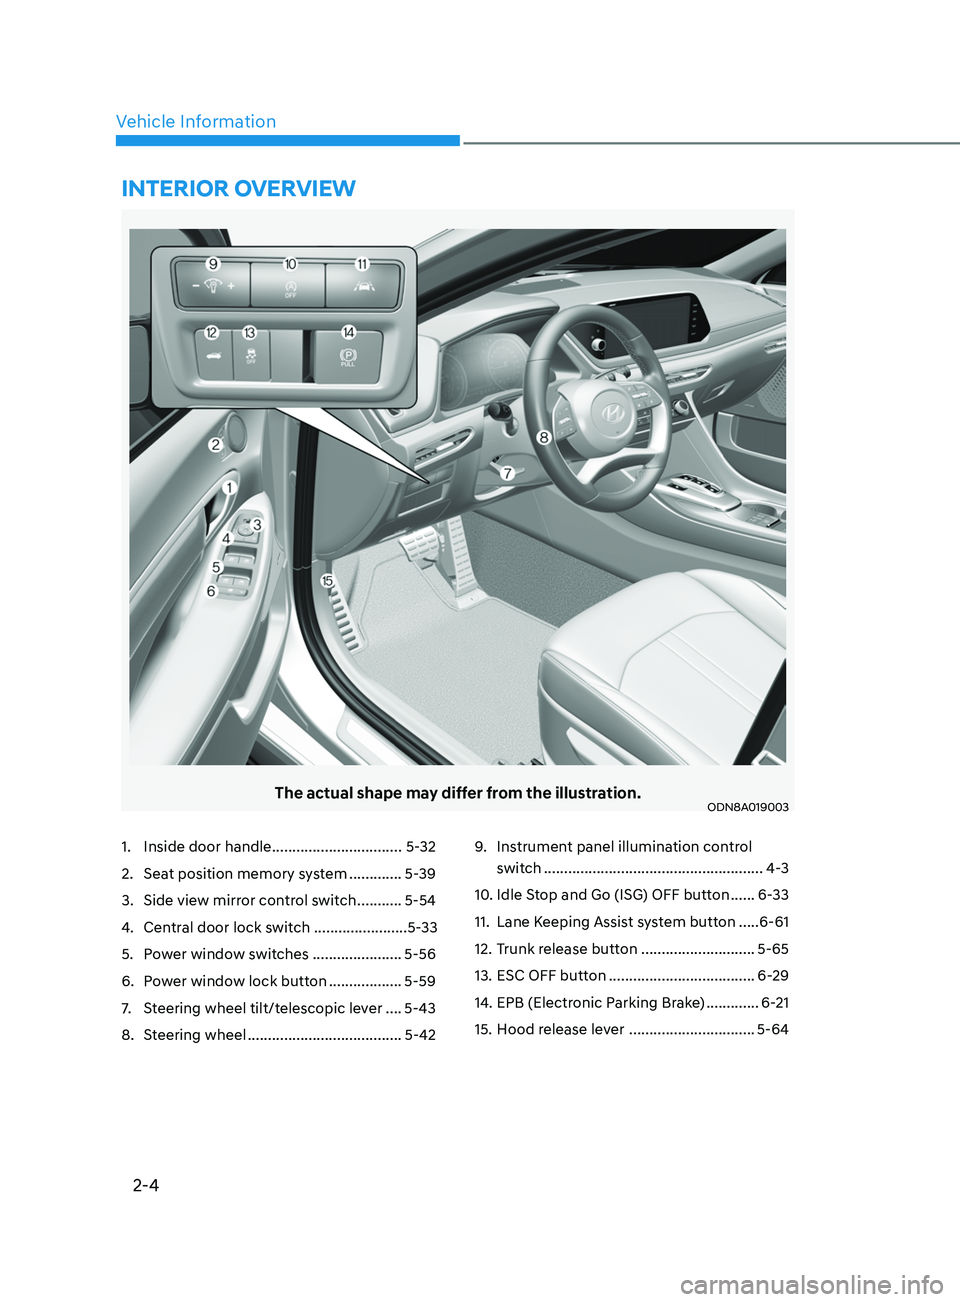 HYUNDAI SONATA LIMITED 2022  Owners Manual 2-4
Vehicle Information
The actual shape may differ from the illustration.ODN8A019003
1. Inside door handle  ................................ 5-32
2.  
Sea
 t position memory system   .............5-3